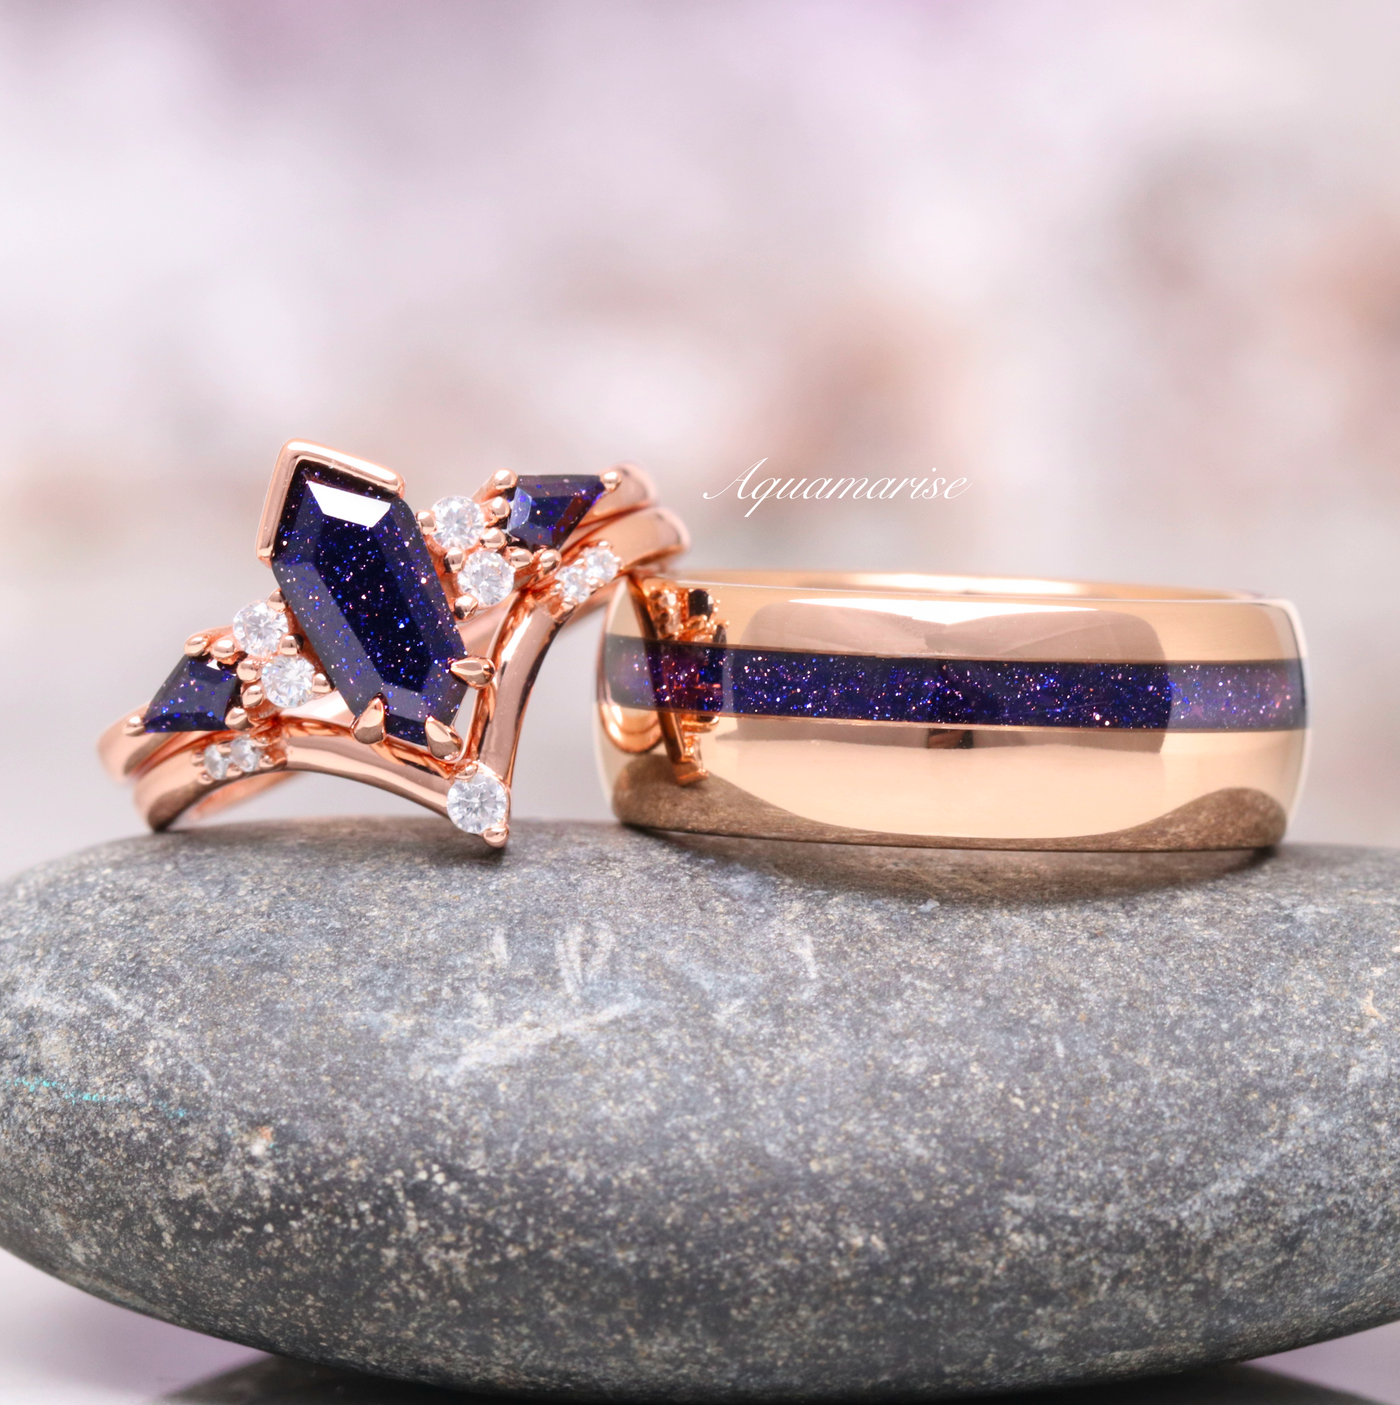 Coffin Kite Galaxy Sandstone Ring- 14K Rose Gold Vermeil Unique Goldstone Engagement Ring Set- Unique Promise Ring For Her Orion Nebula Ring